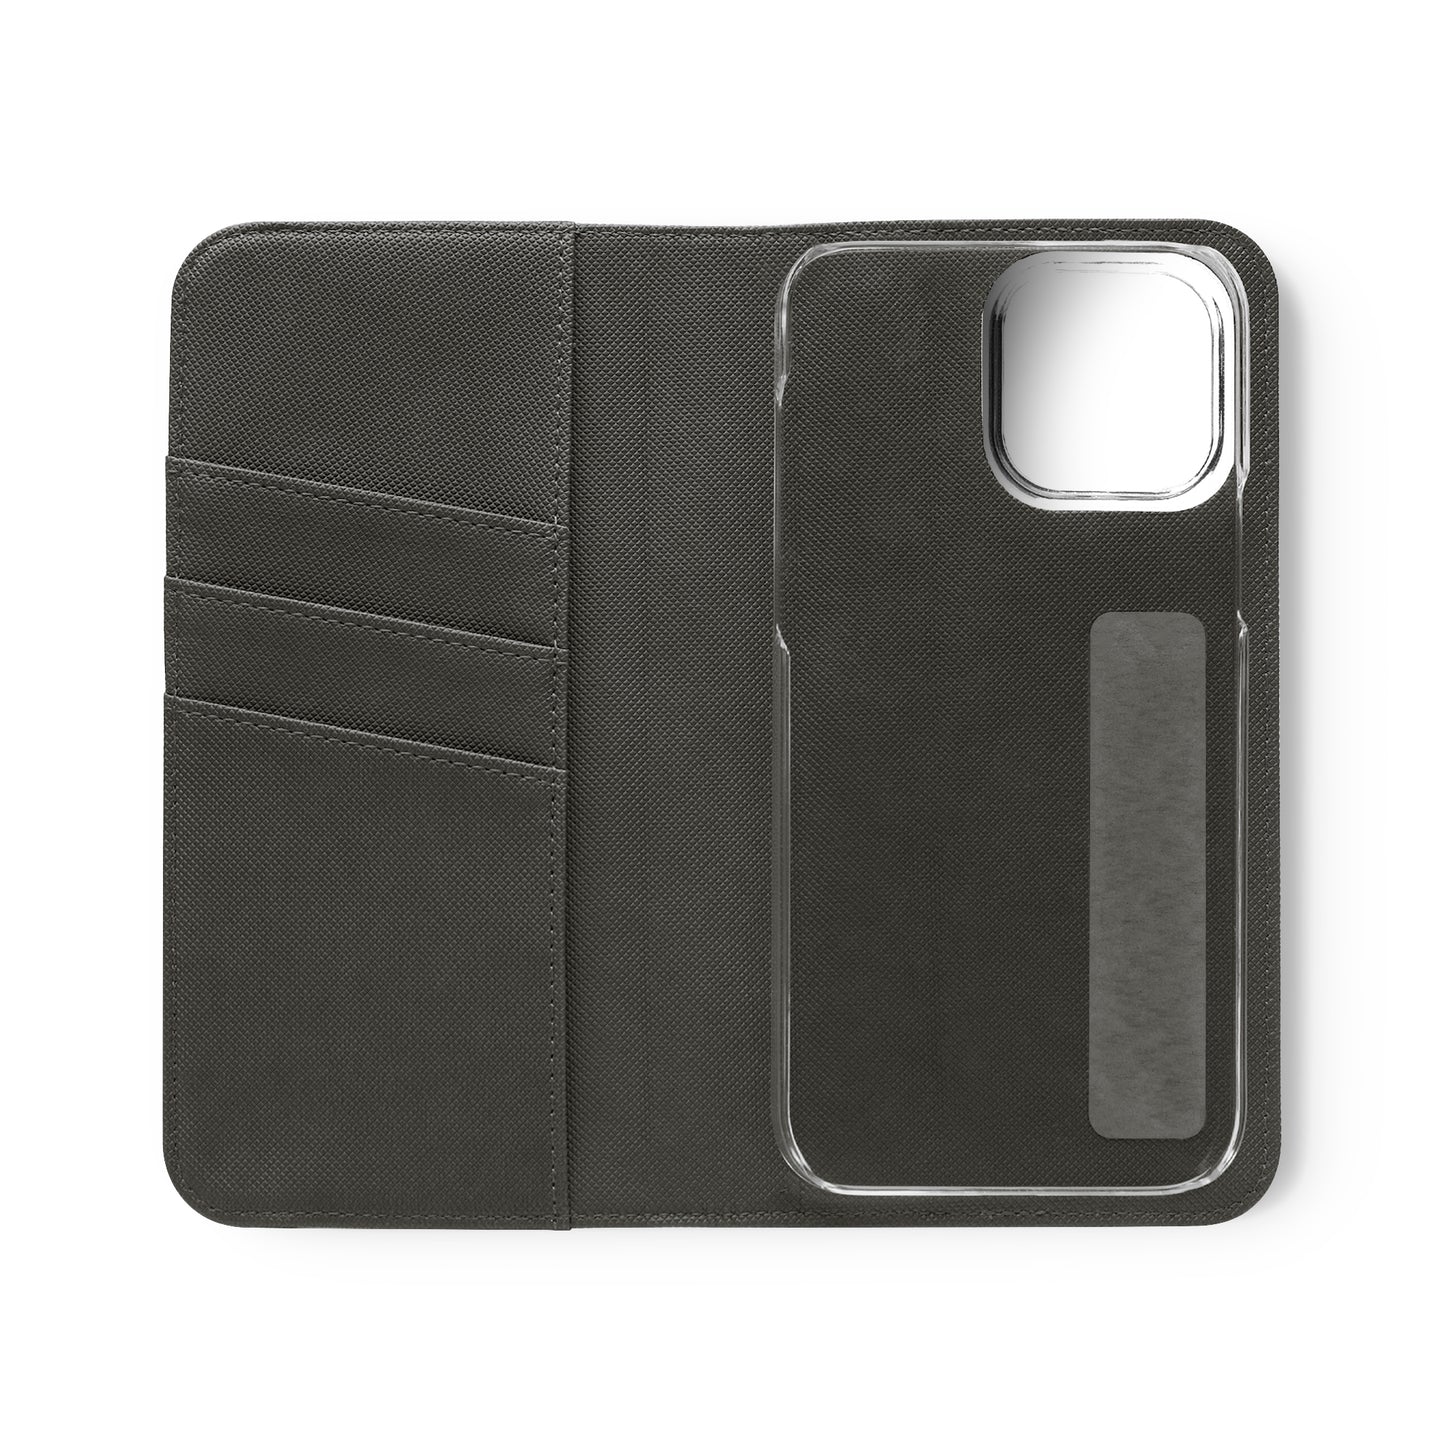 Claimed By God Purpose Over Pain Christian Phone Flip Cases Printify